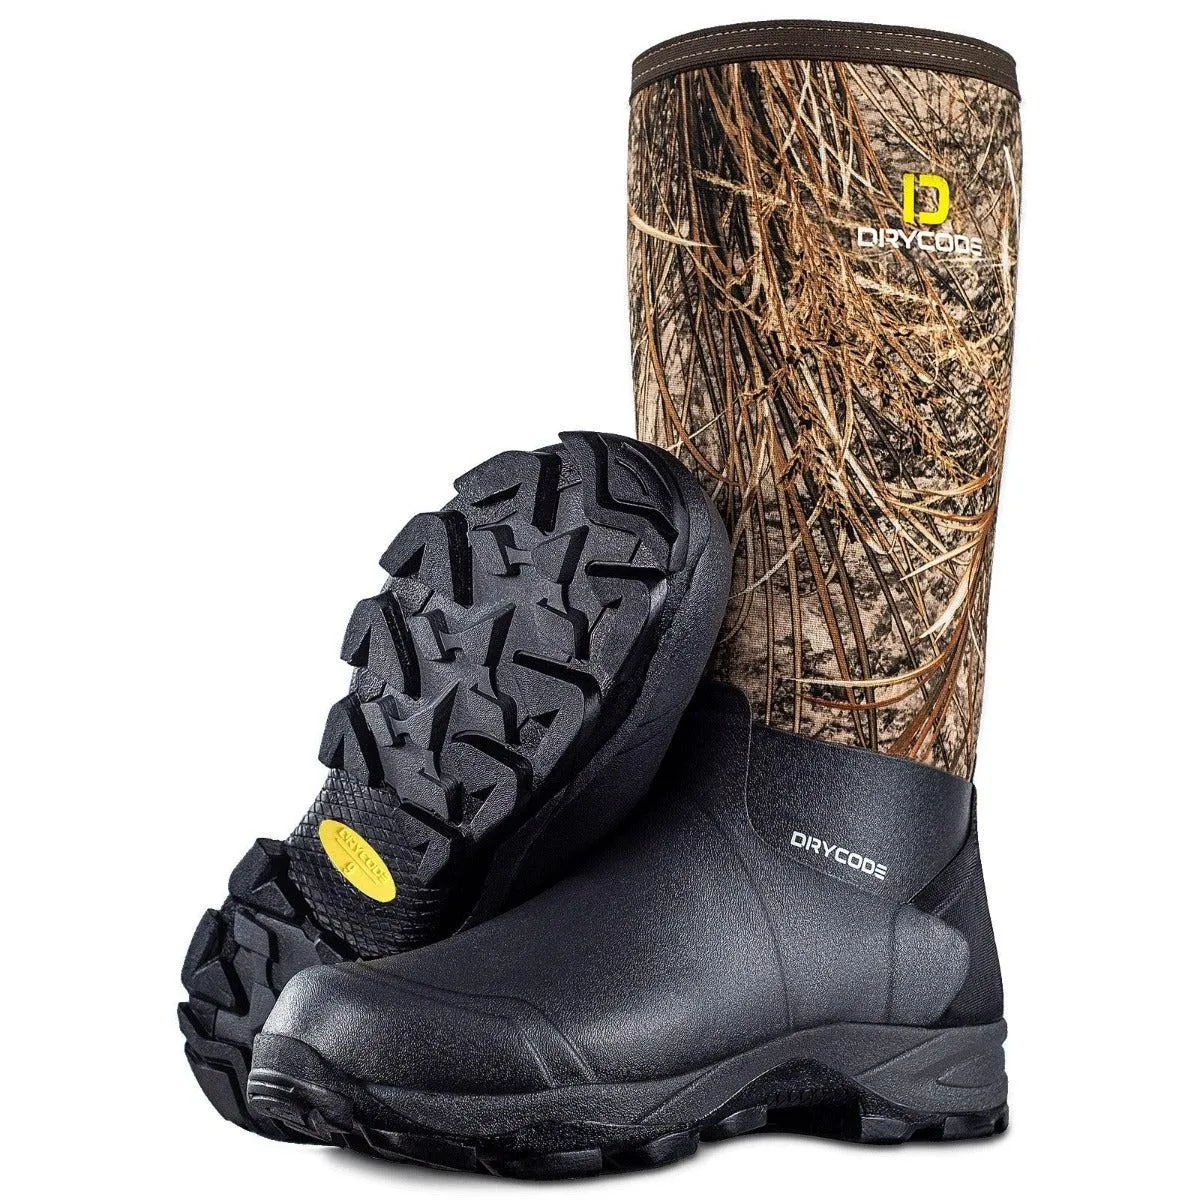 DRYCODE Rubber Hunting Boots (Real Reed) for Men, 5.5mm Neoprene Lightweight Boots